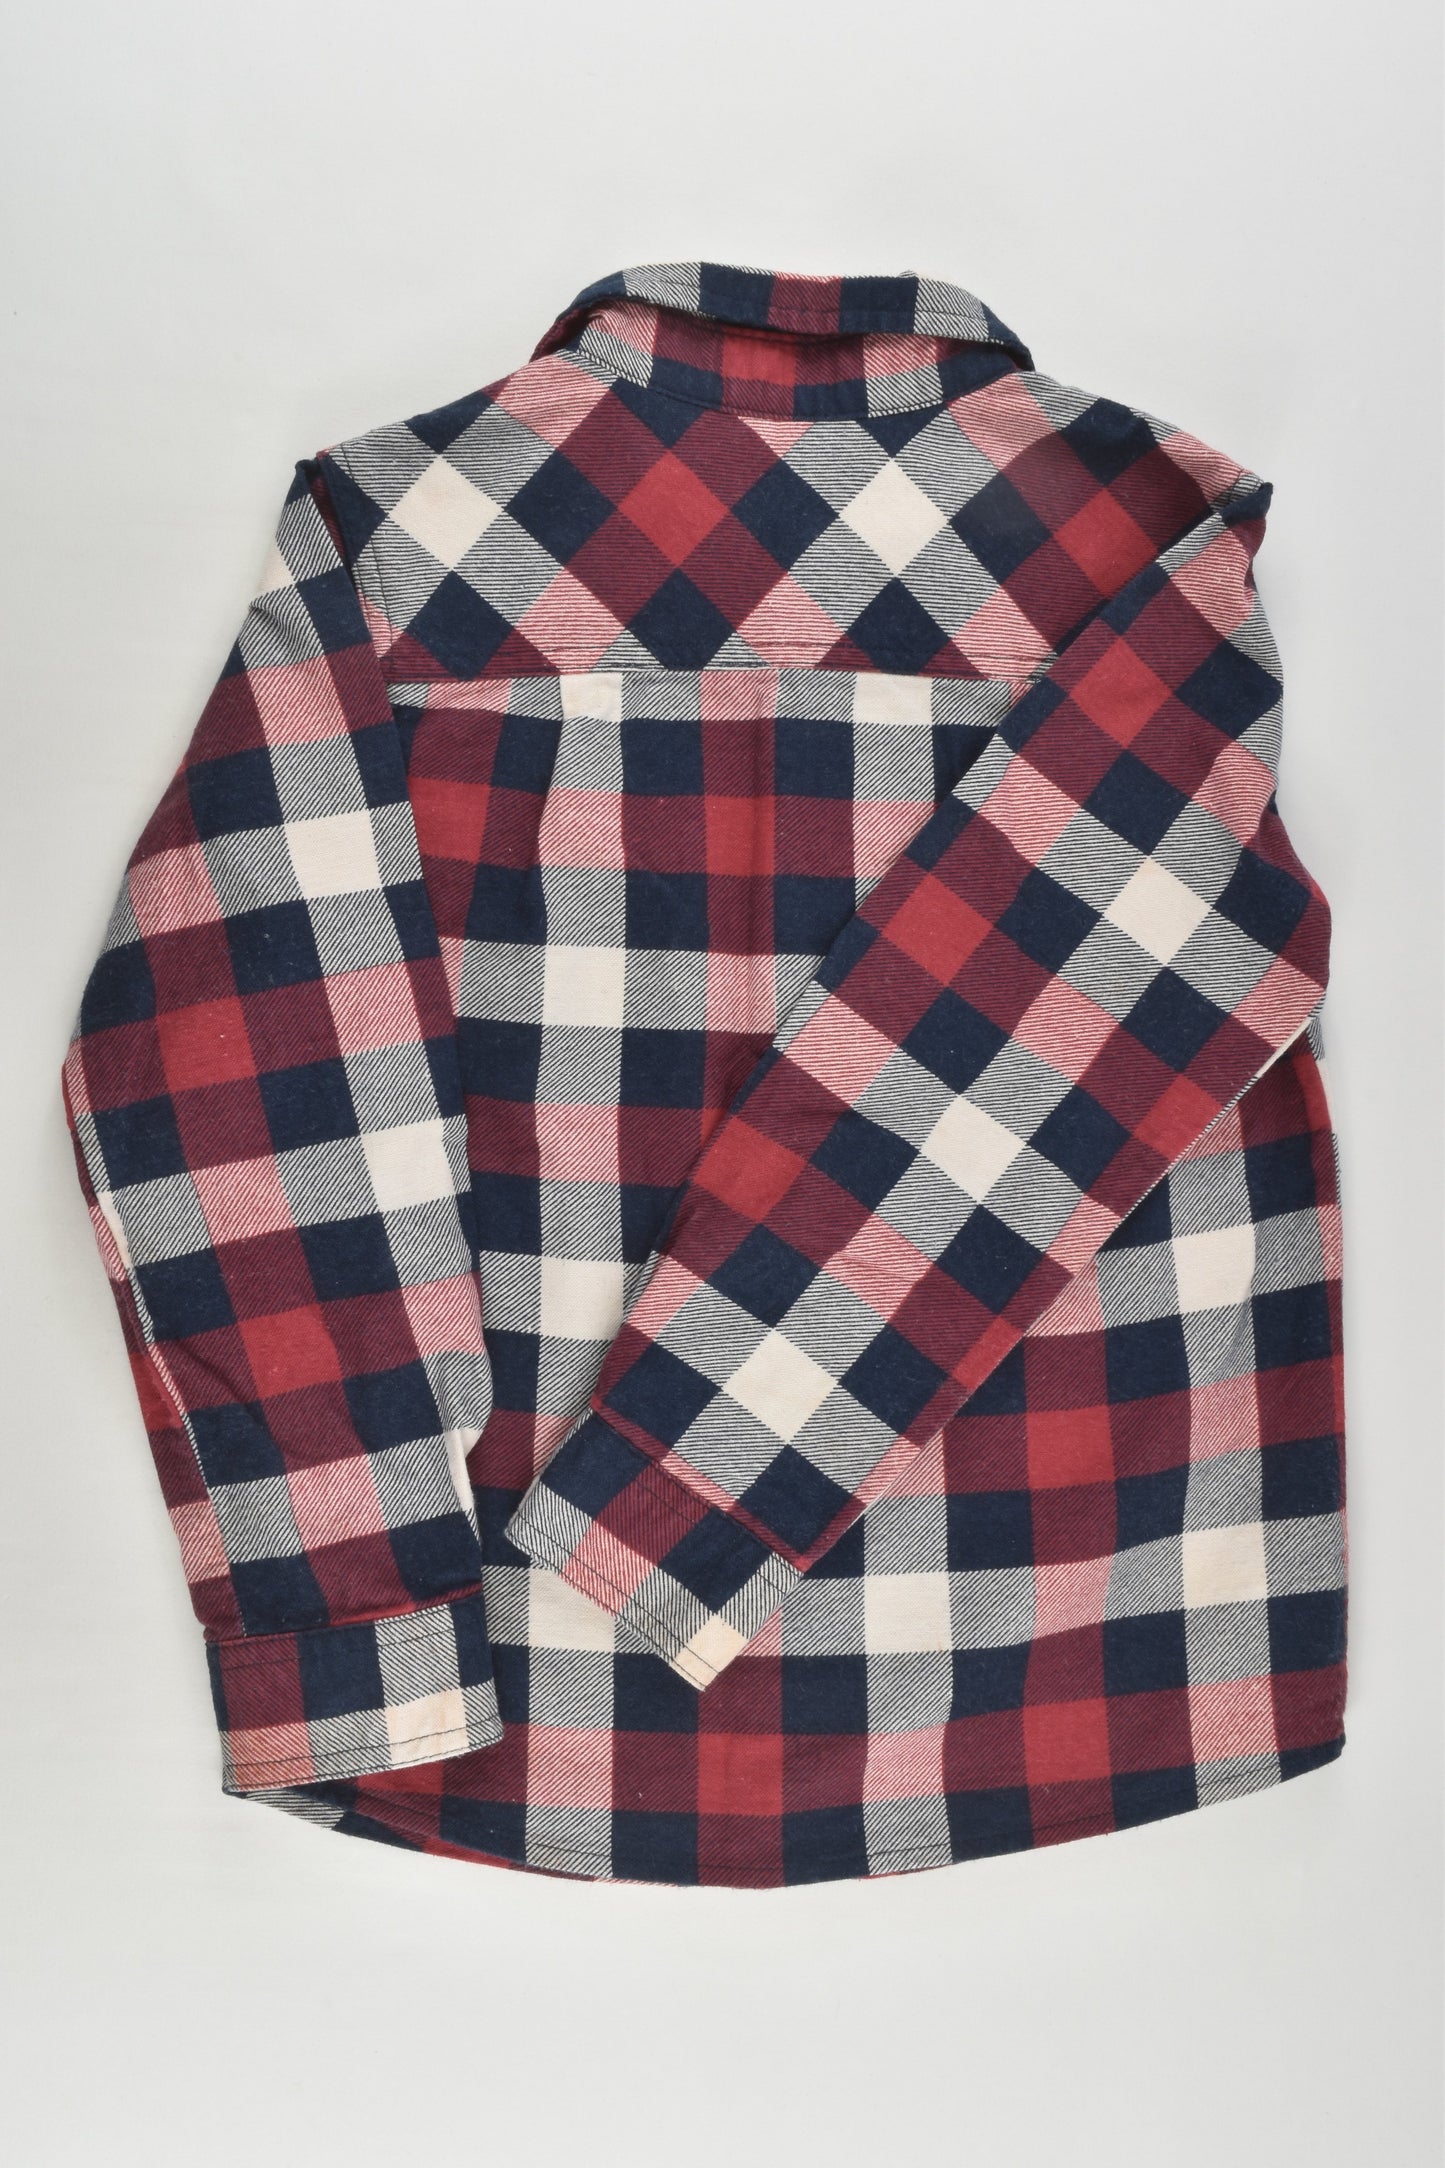 Kids & Co Size 6 Checked Casual Winter Shirt